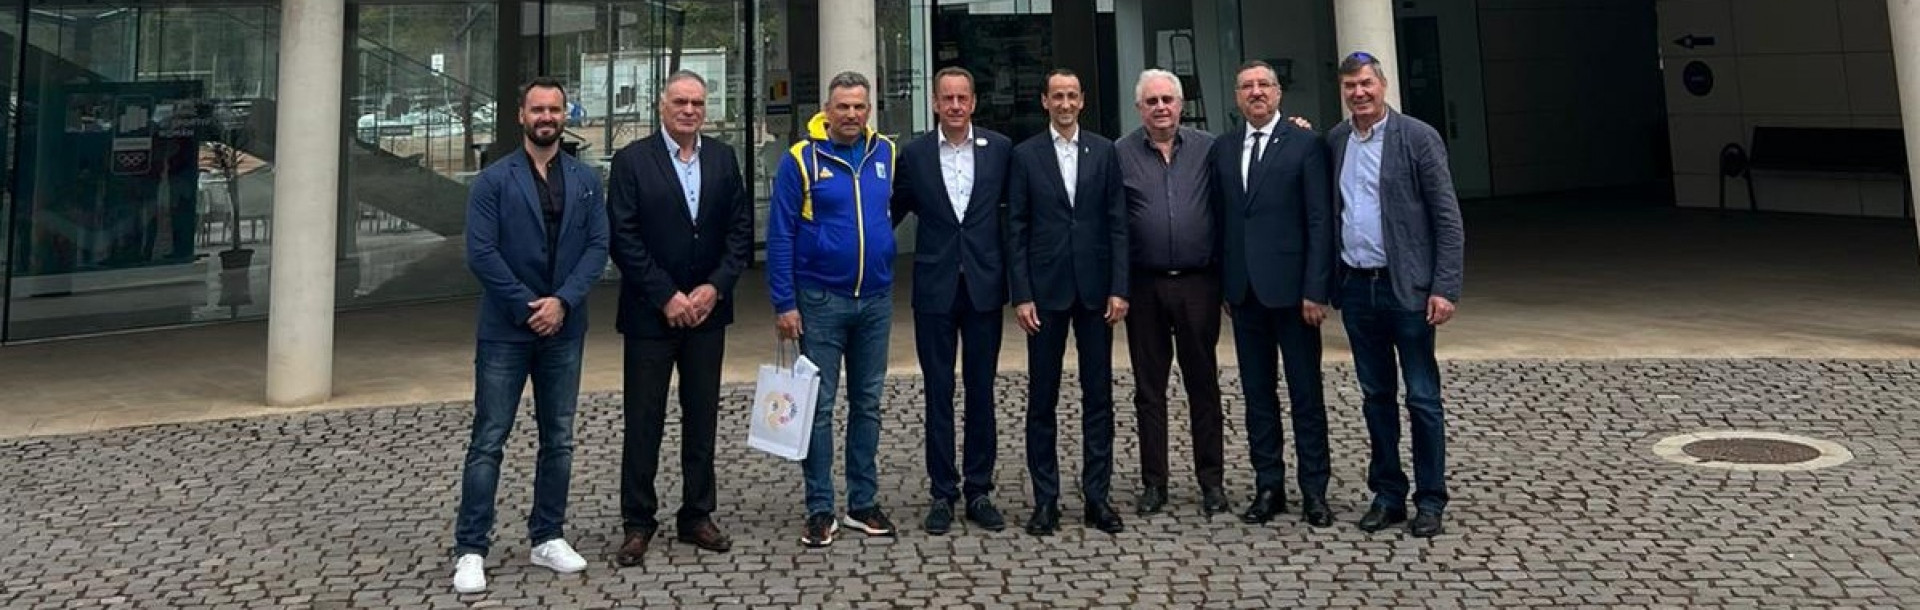 ICF President Thomas Konietzko, fourth from left, meeting with officials in Romania ©ICF